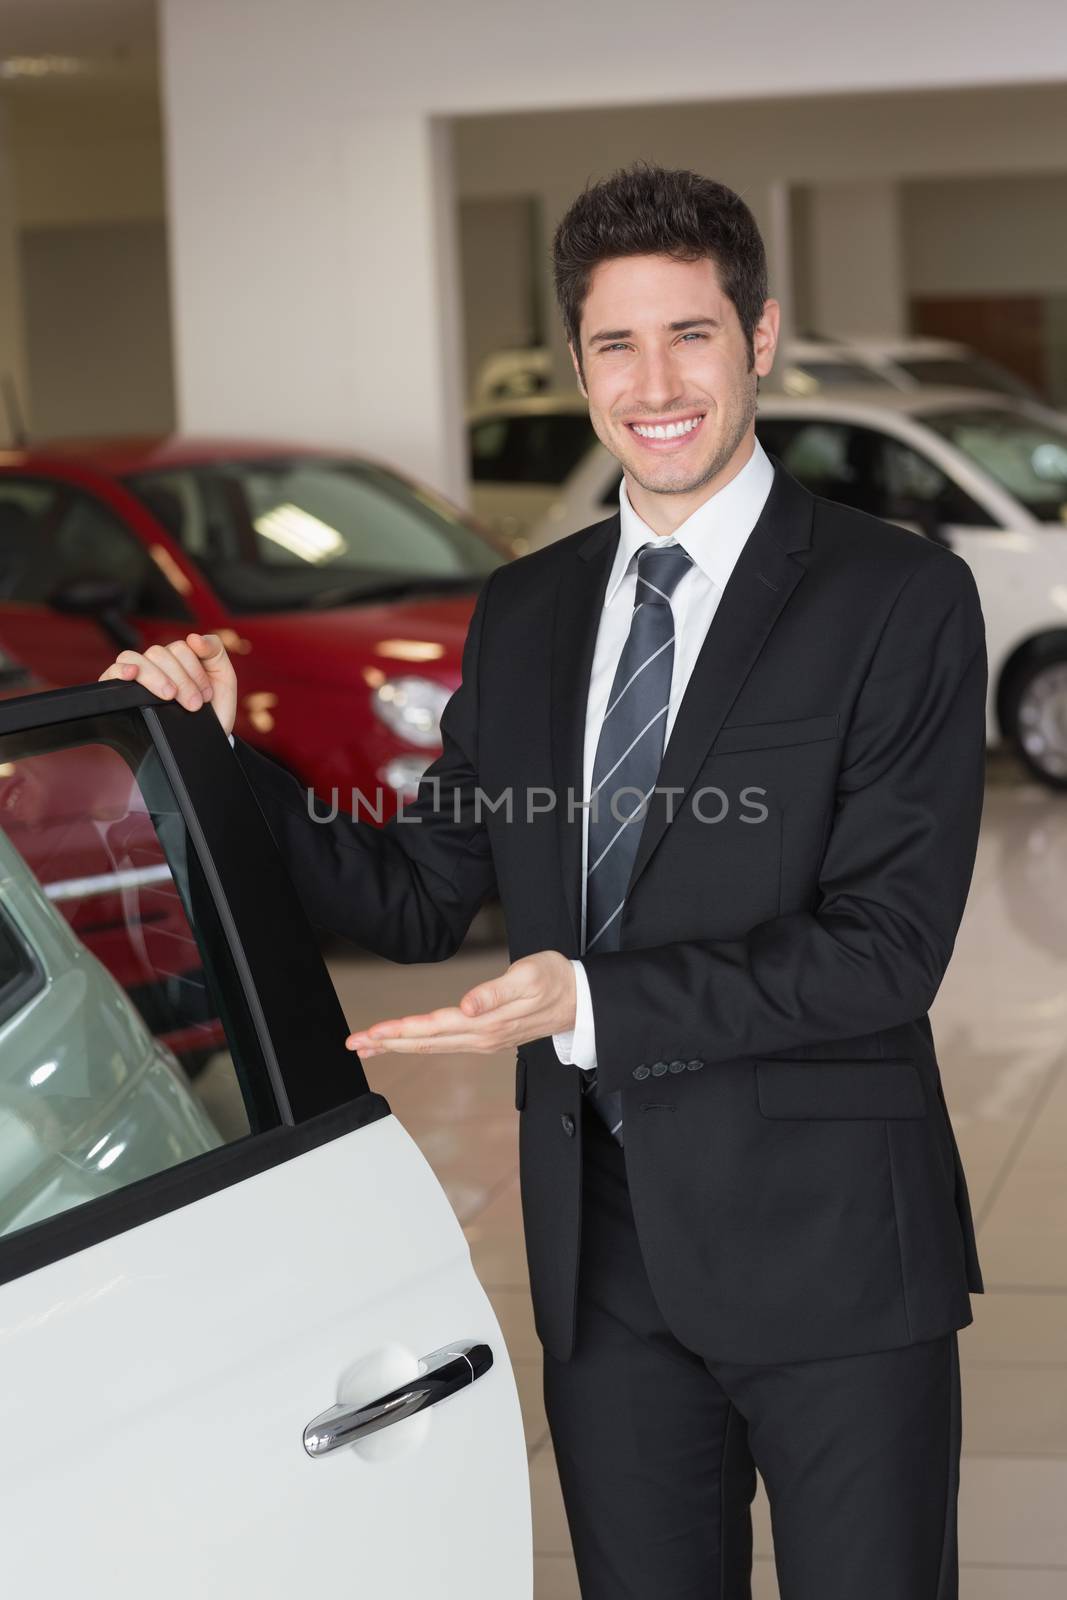 Smiling businessman showing a car for sale by Wavebreakmedia